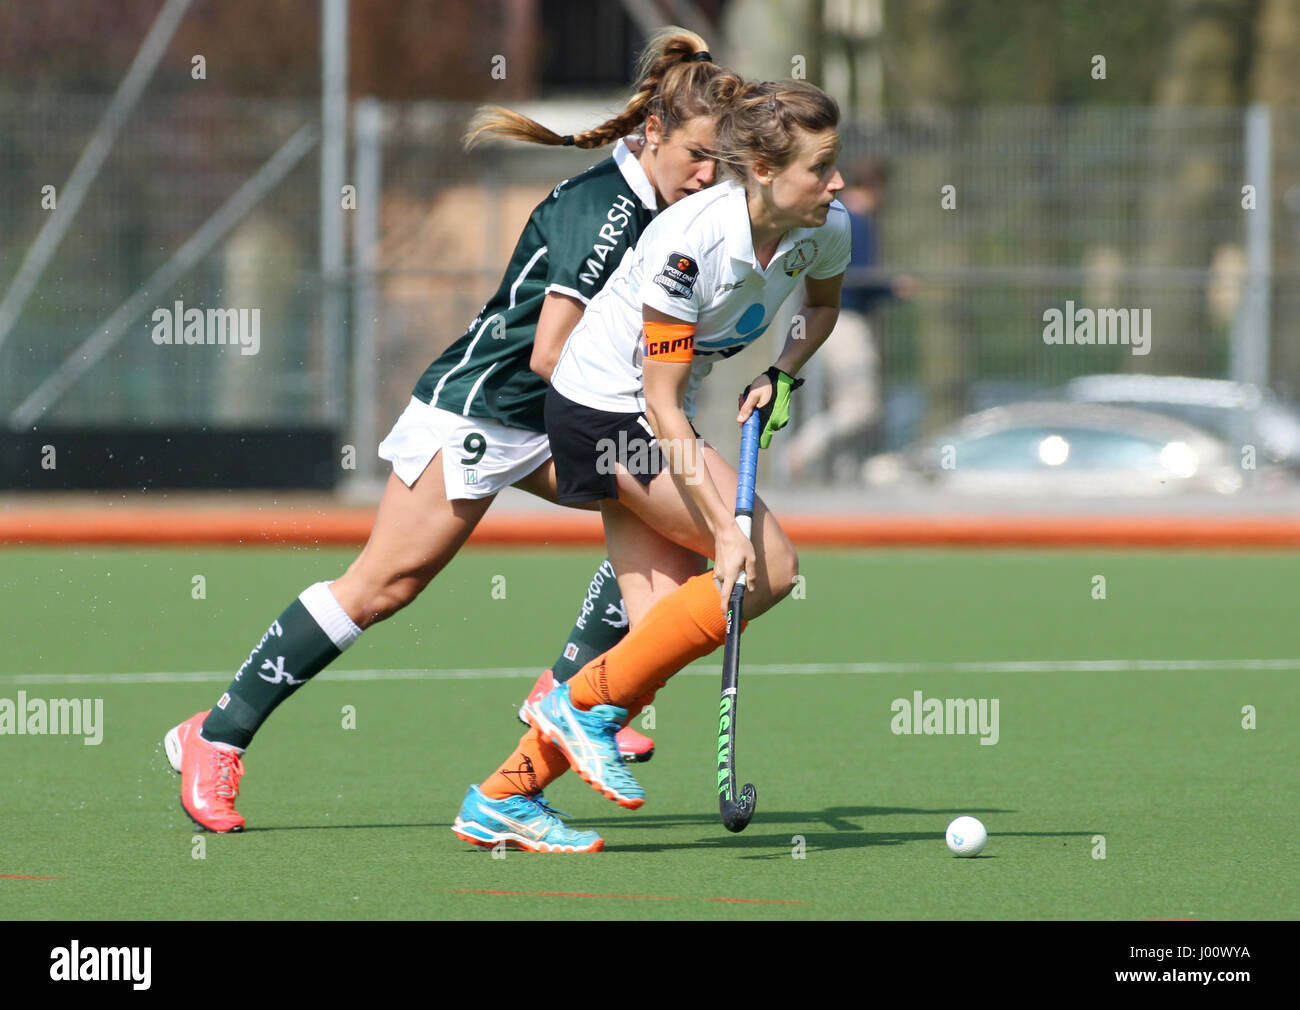 Nivelles, Belgium. , . Honor Dames National League: Hélène Delmée of Pingouin and Gloria Comerma of Waterloo in game action during the match Pingouin - Waterloo Credit: Leo Cavallo/Alamy Live News Stock Photo